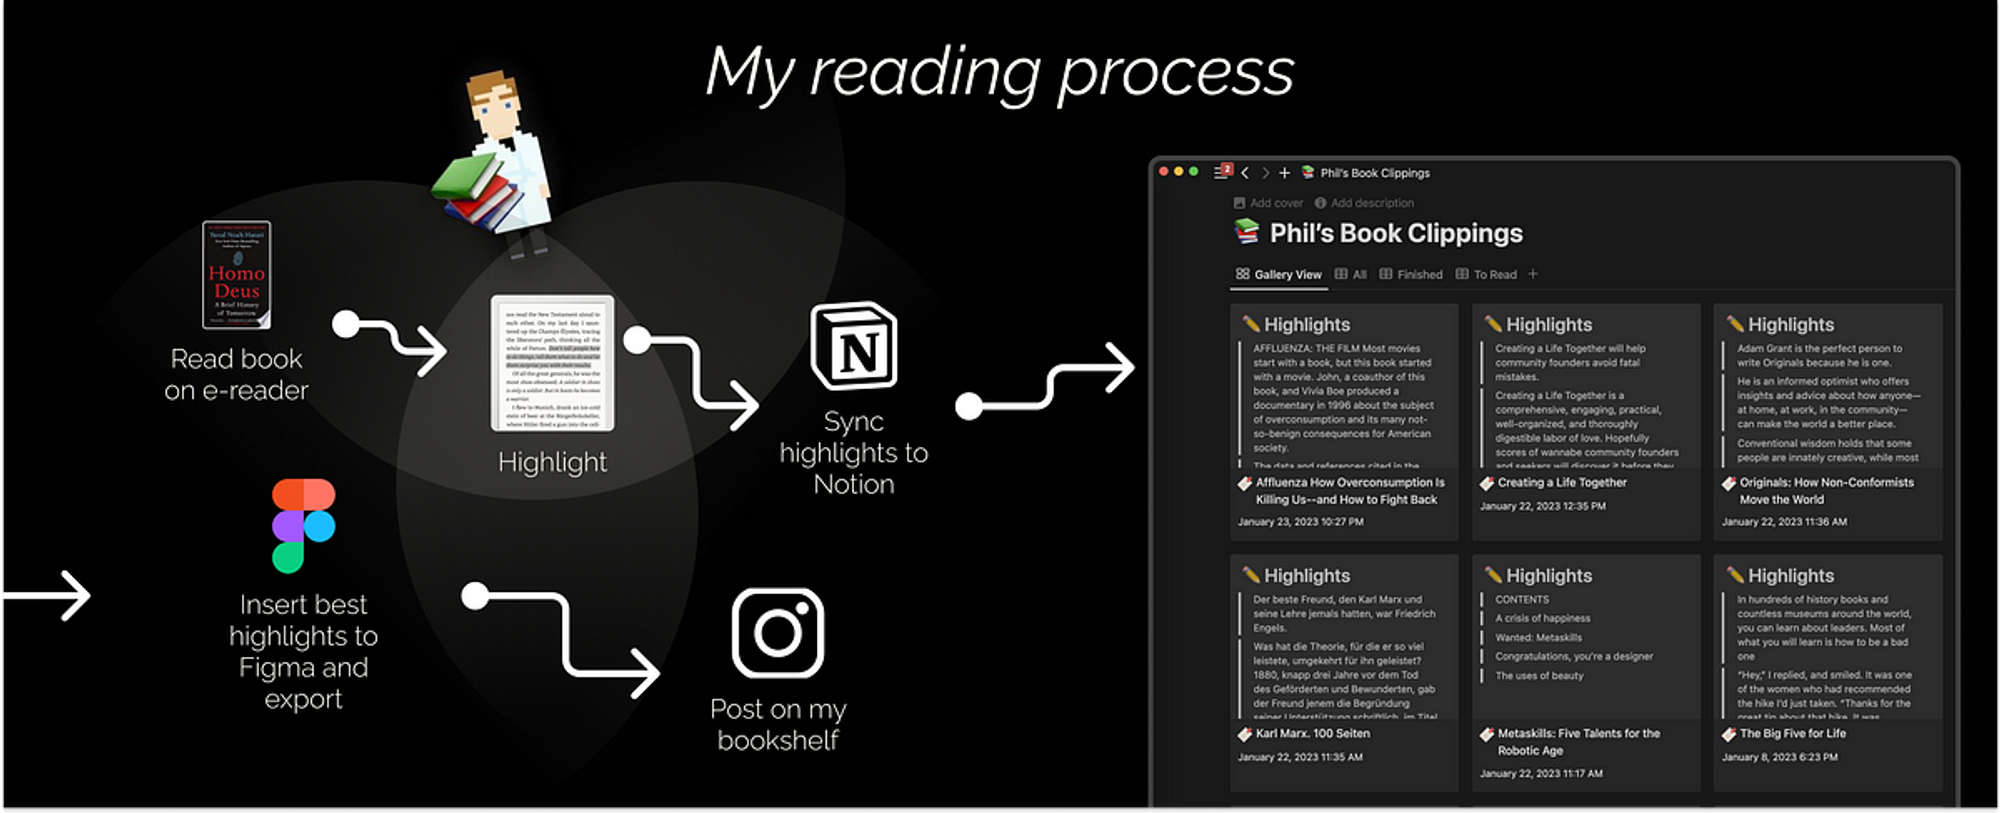 Kindle meets Notion meets AI: How I established more meaningful reading habits #consume&create